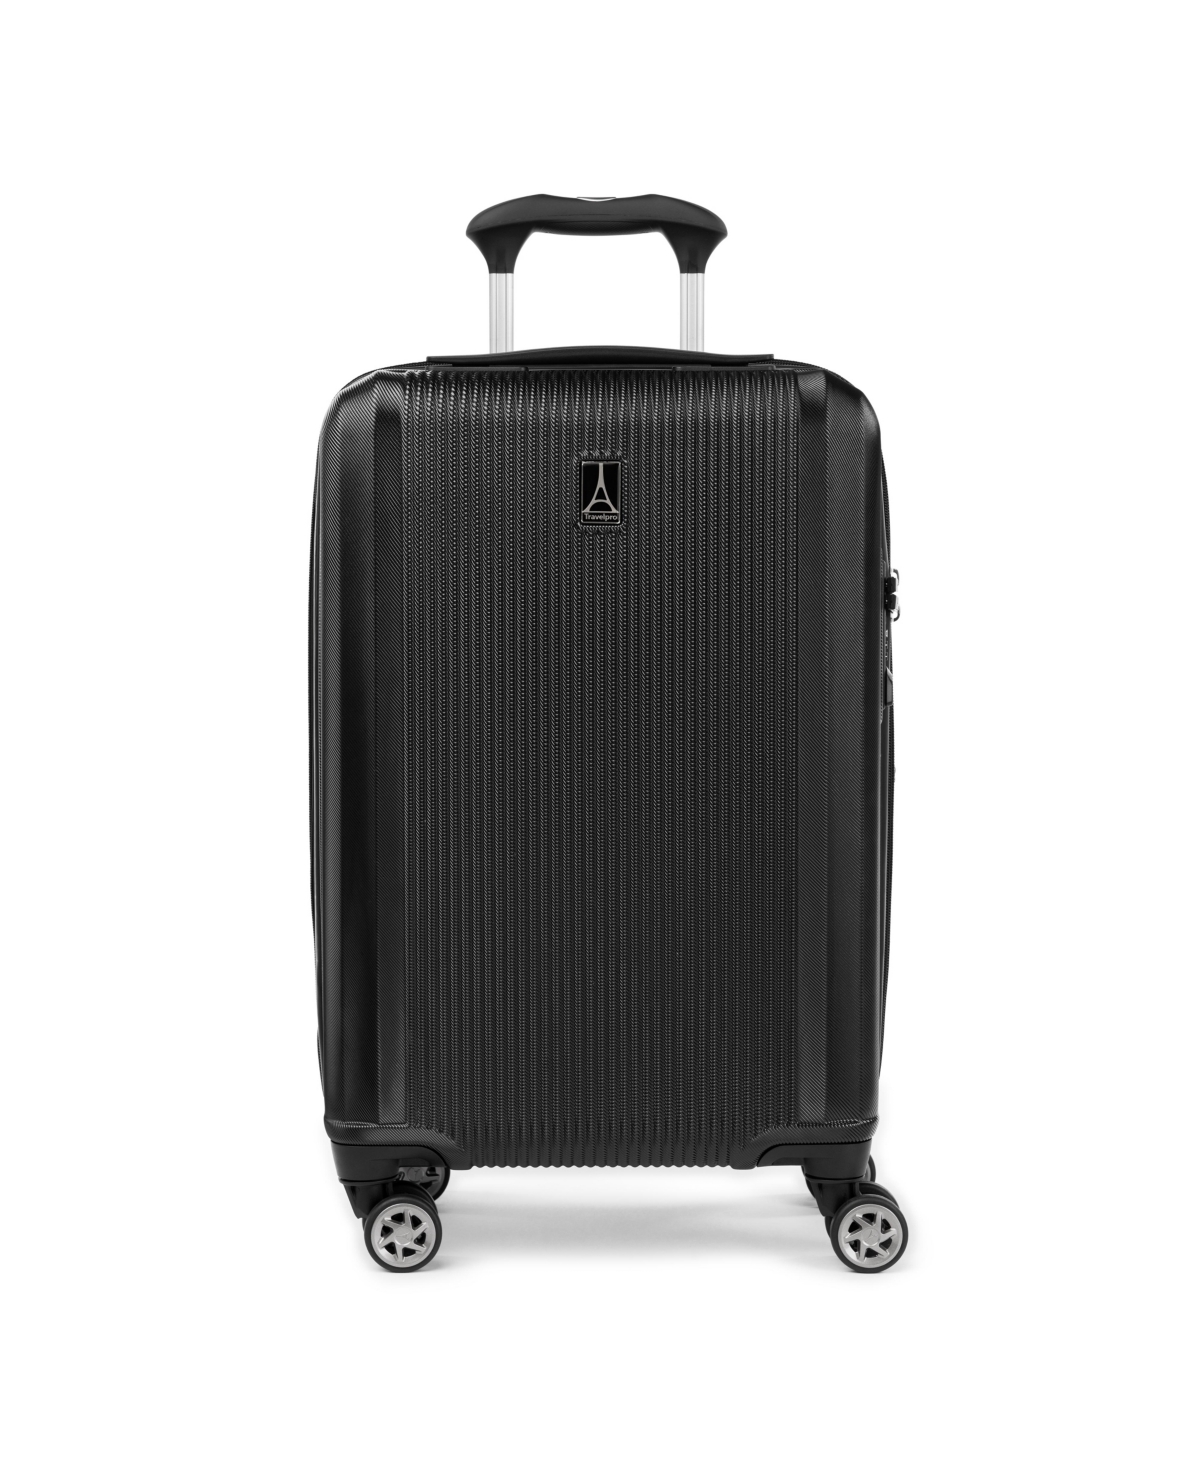 Travelpro Walkabout 6 Carry-on Expandable Hardside Spinner In Black